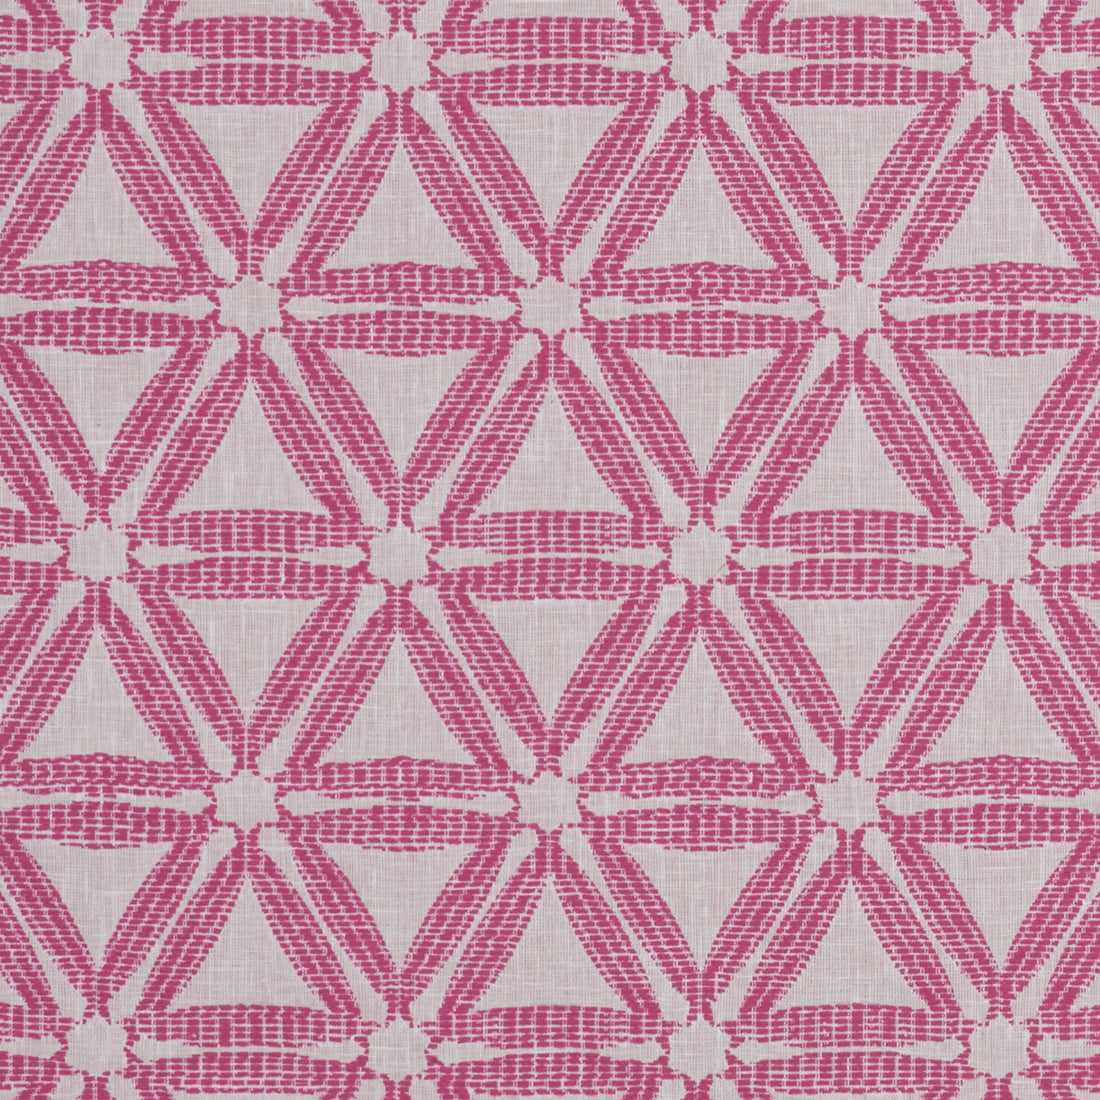 Delta fabric in raspberry color - pattern F1053/04.CAC.0 - by Clarke And Clarke in the Delta By Studio G For C&amp;C collection